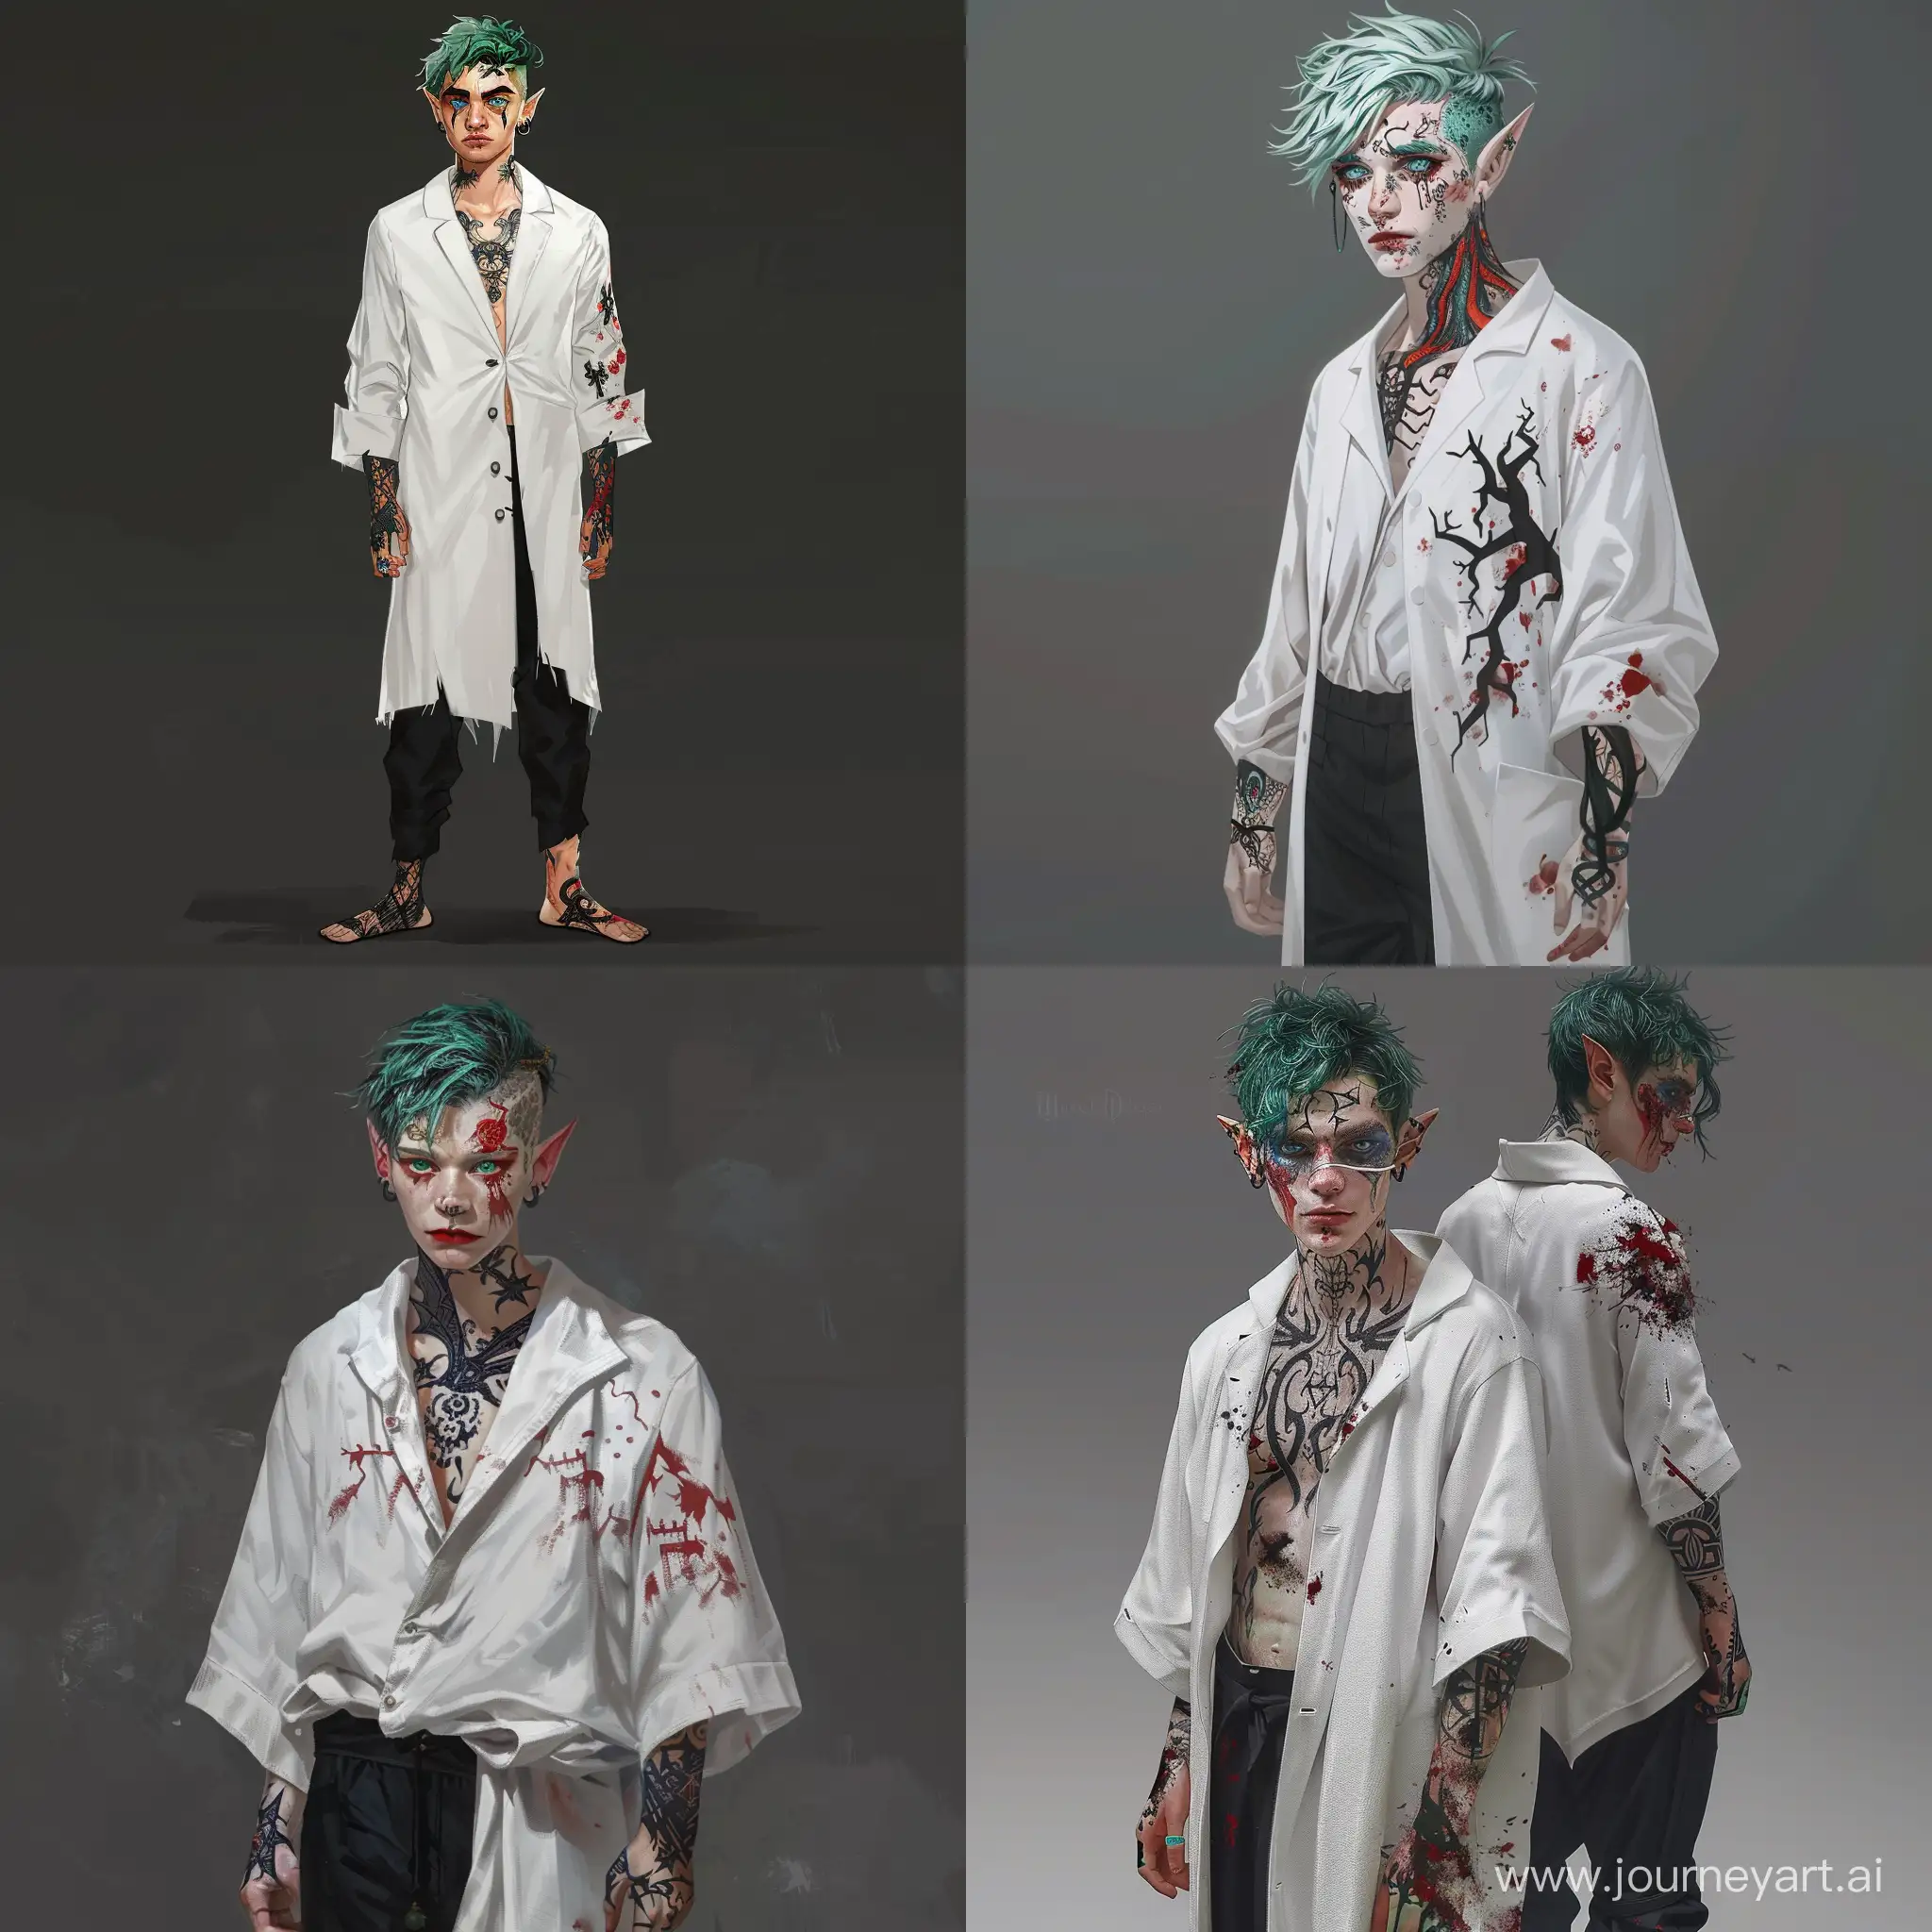 MedicSurgeon-with-Green-Hair-and-Tattoos-in-White-Robe